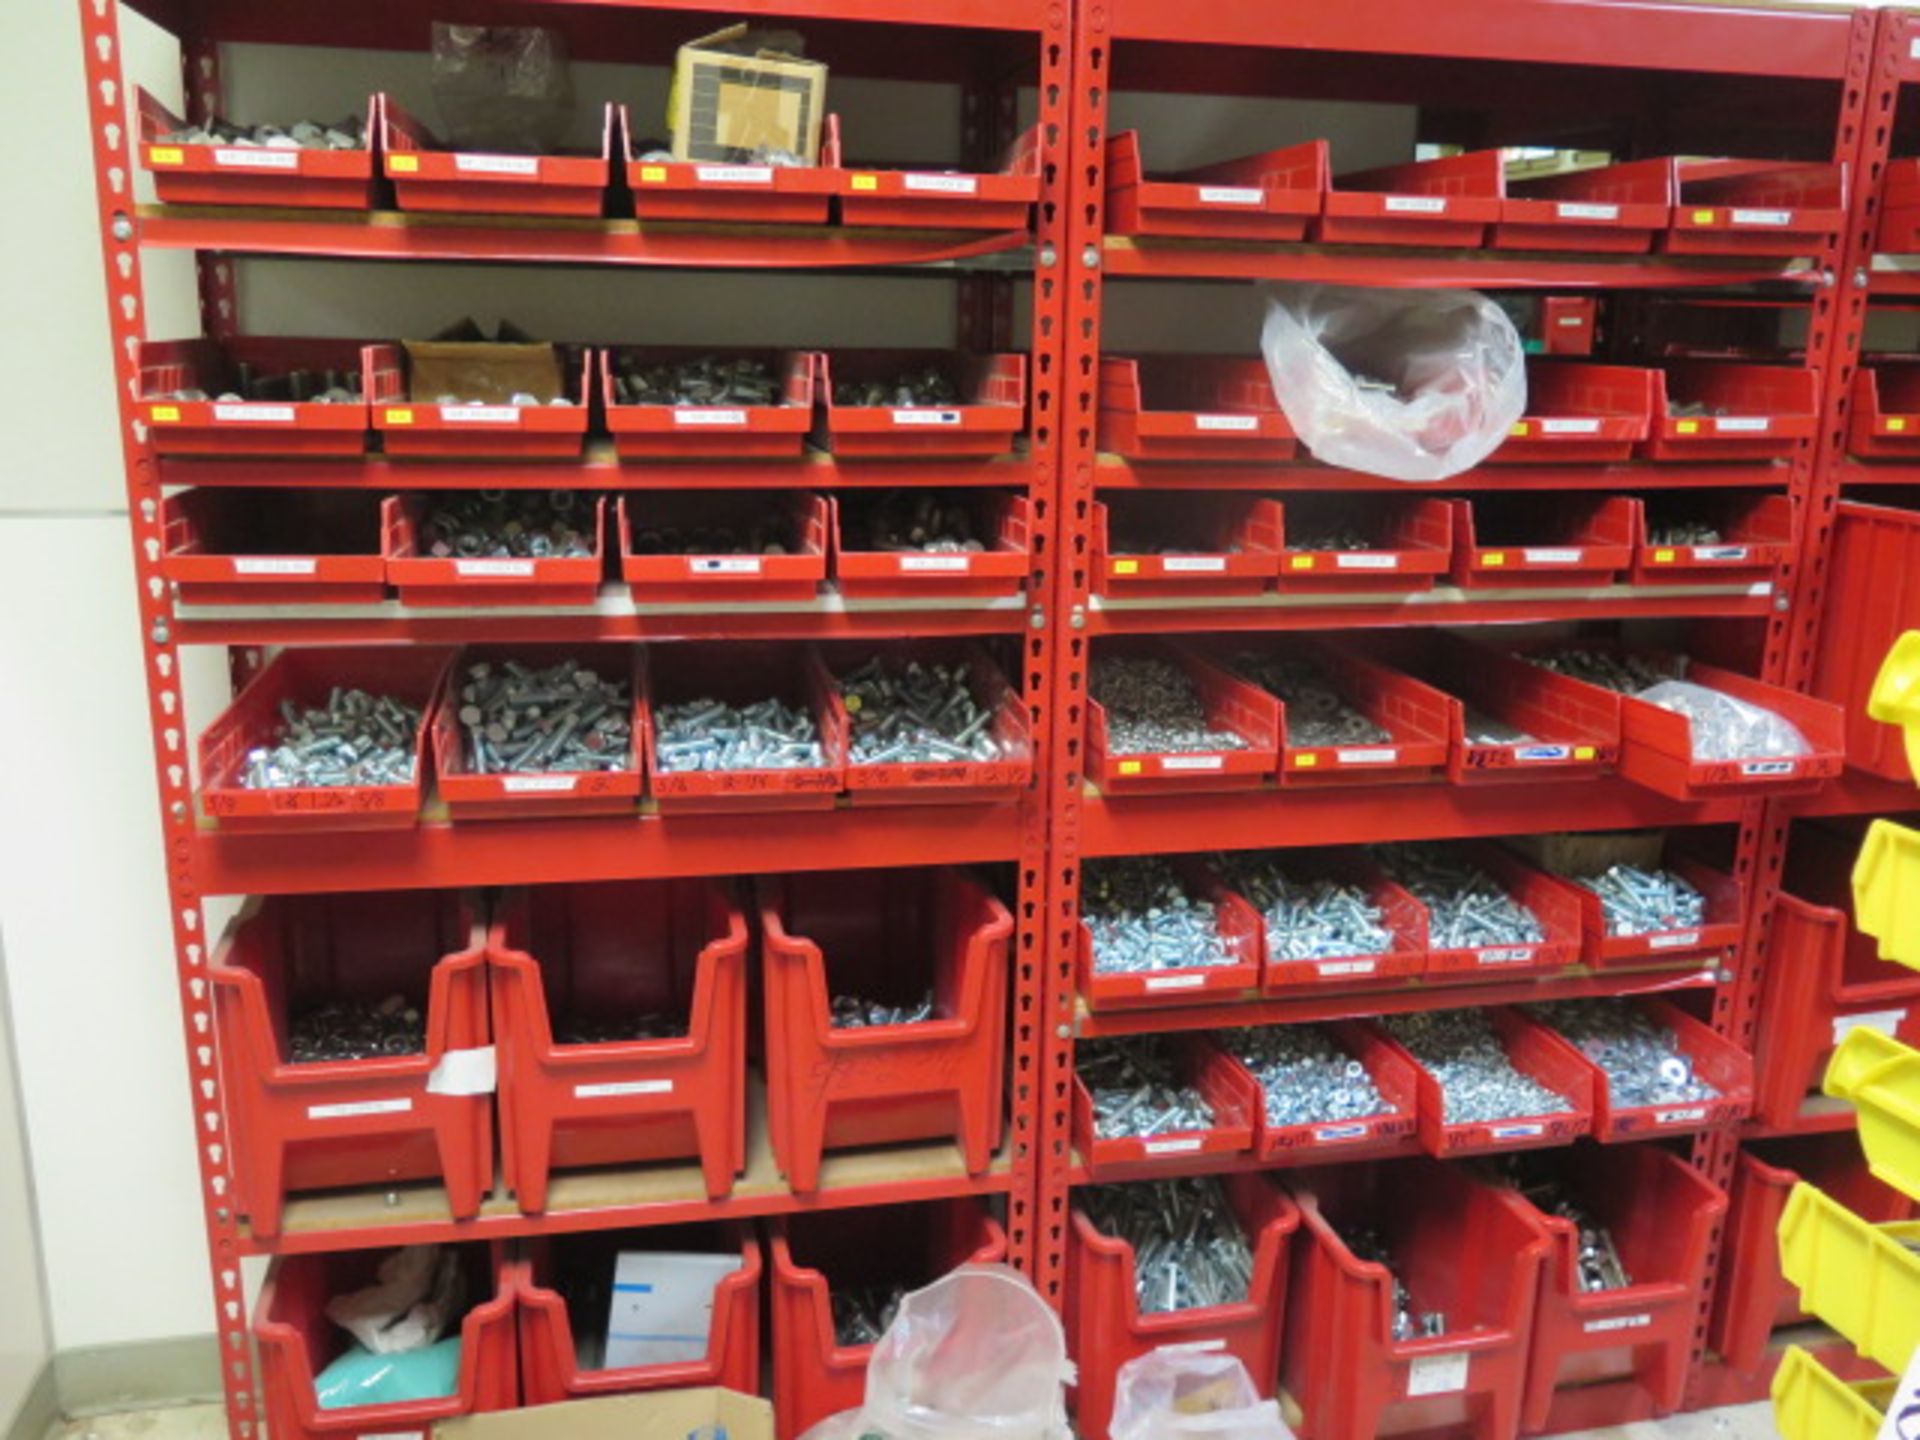 Large Quantity of Stainless Steel, Zink, Nylon Hardware and Anchor Bolts w/ Storage Bins and